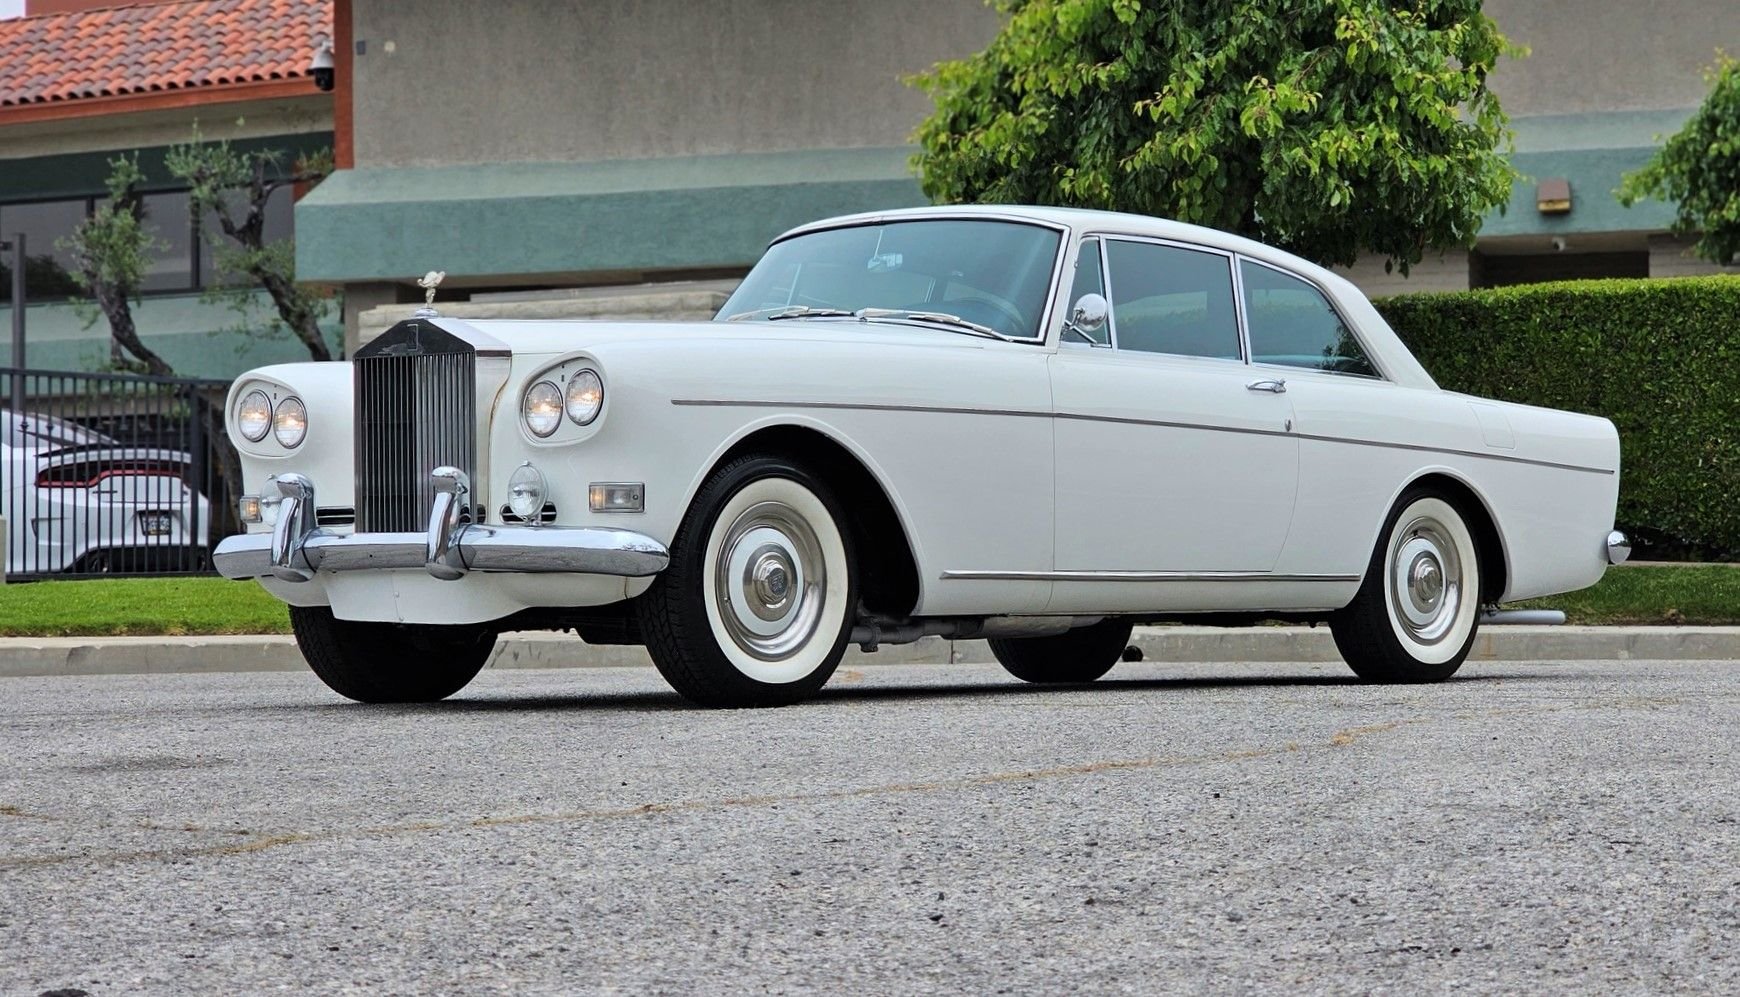 1965 Rolls-Royce SILVER CLOUD III COUPE | Vintage Car Collector